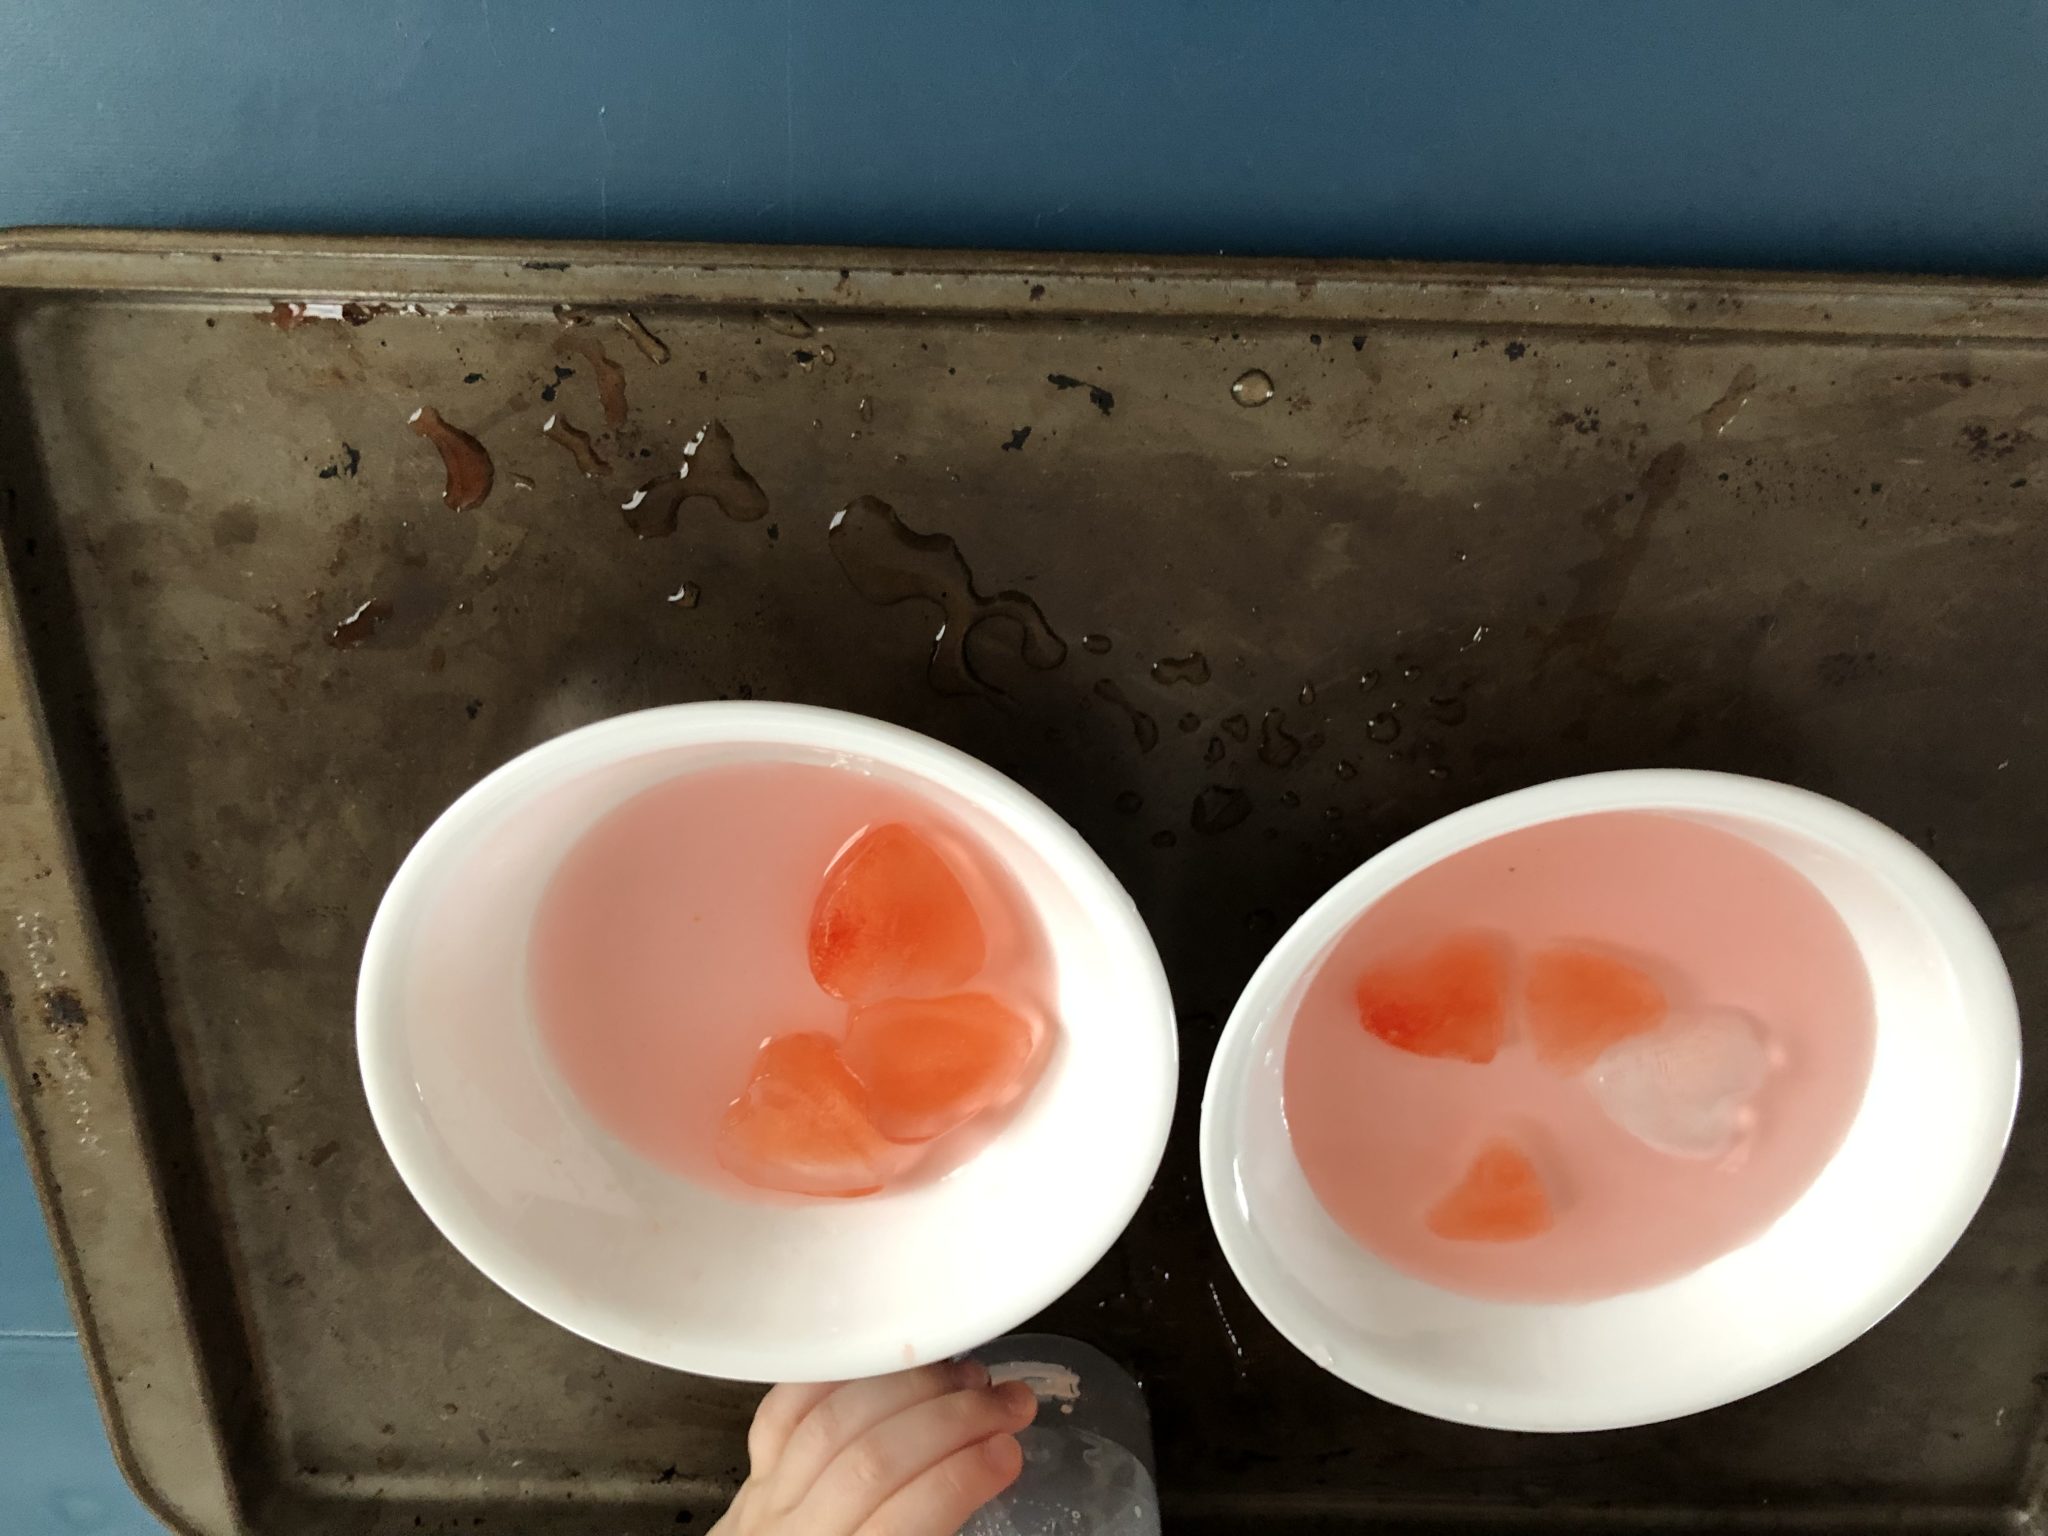 Bowls side by side with water and ice in both